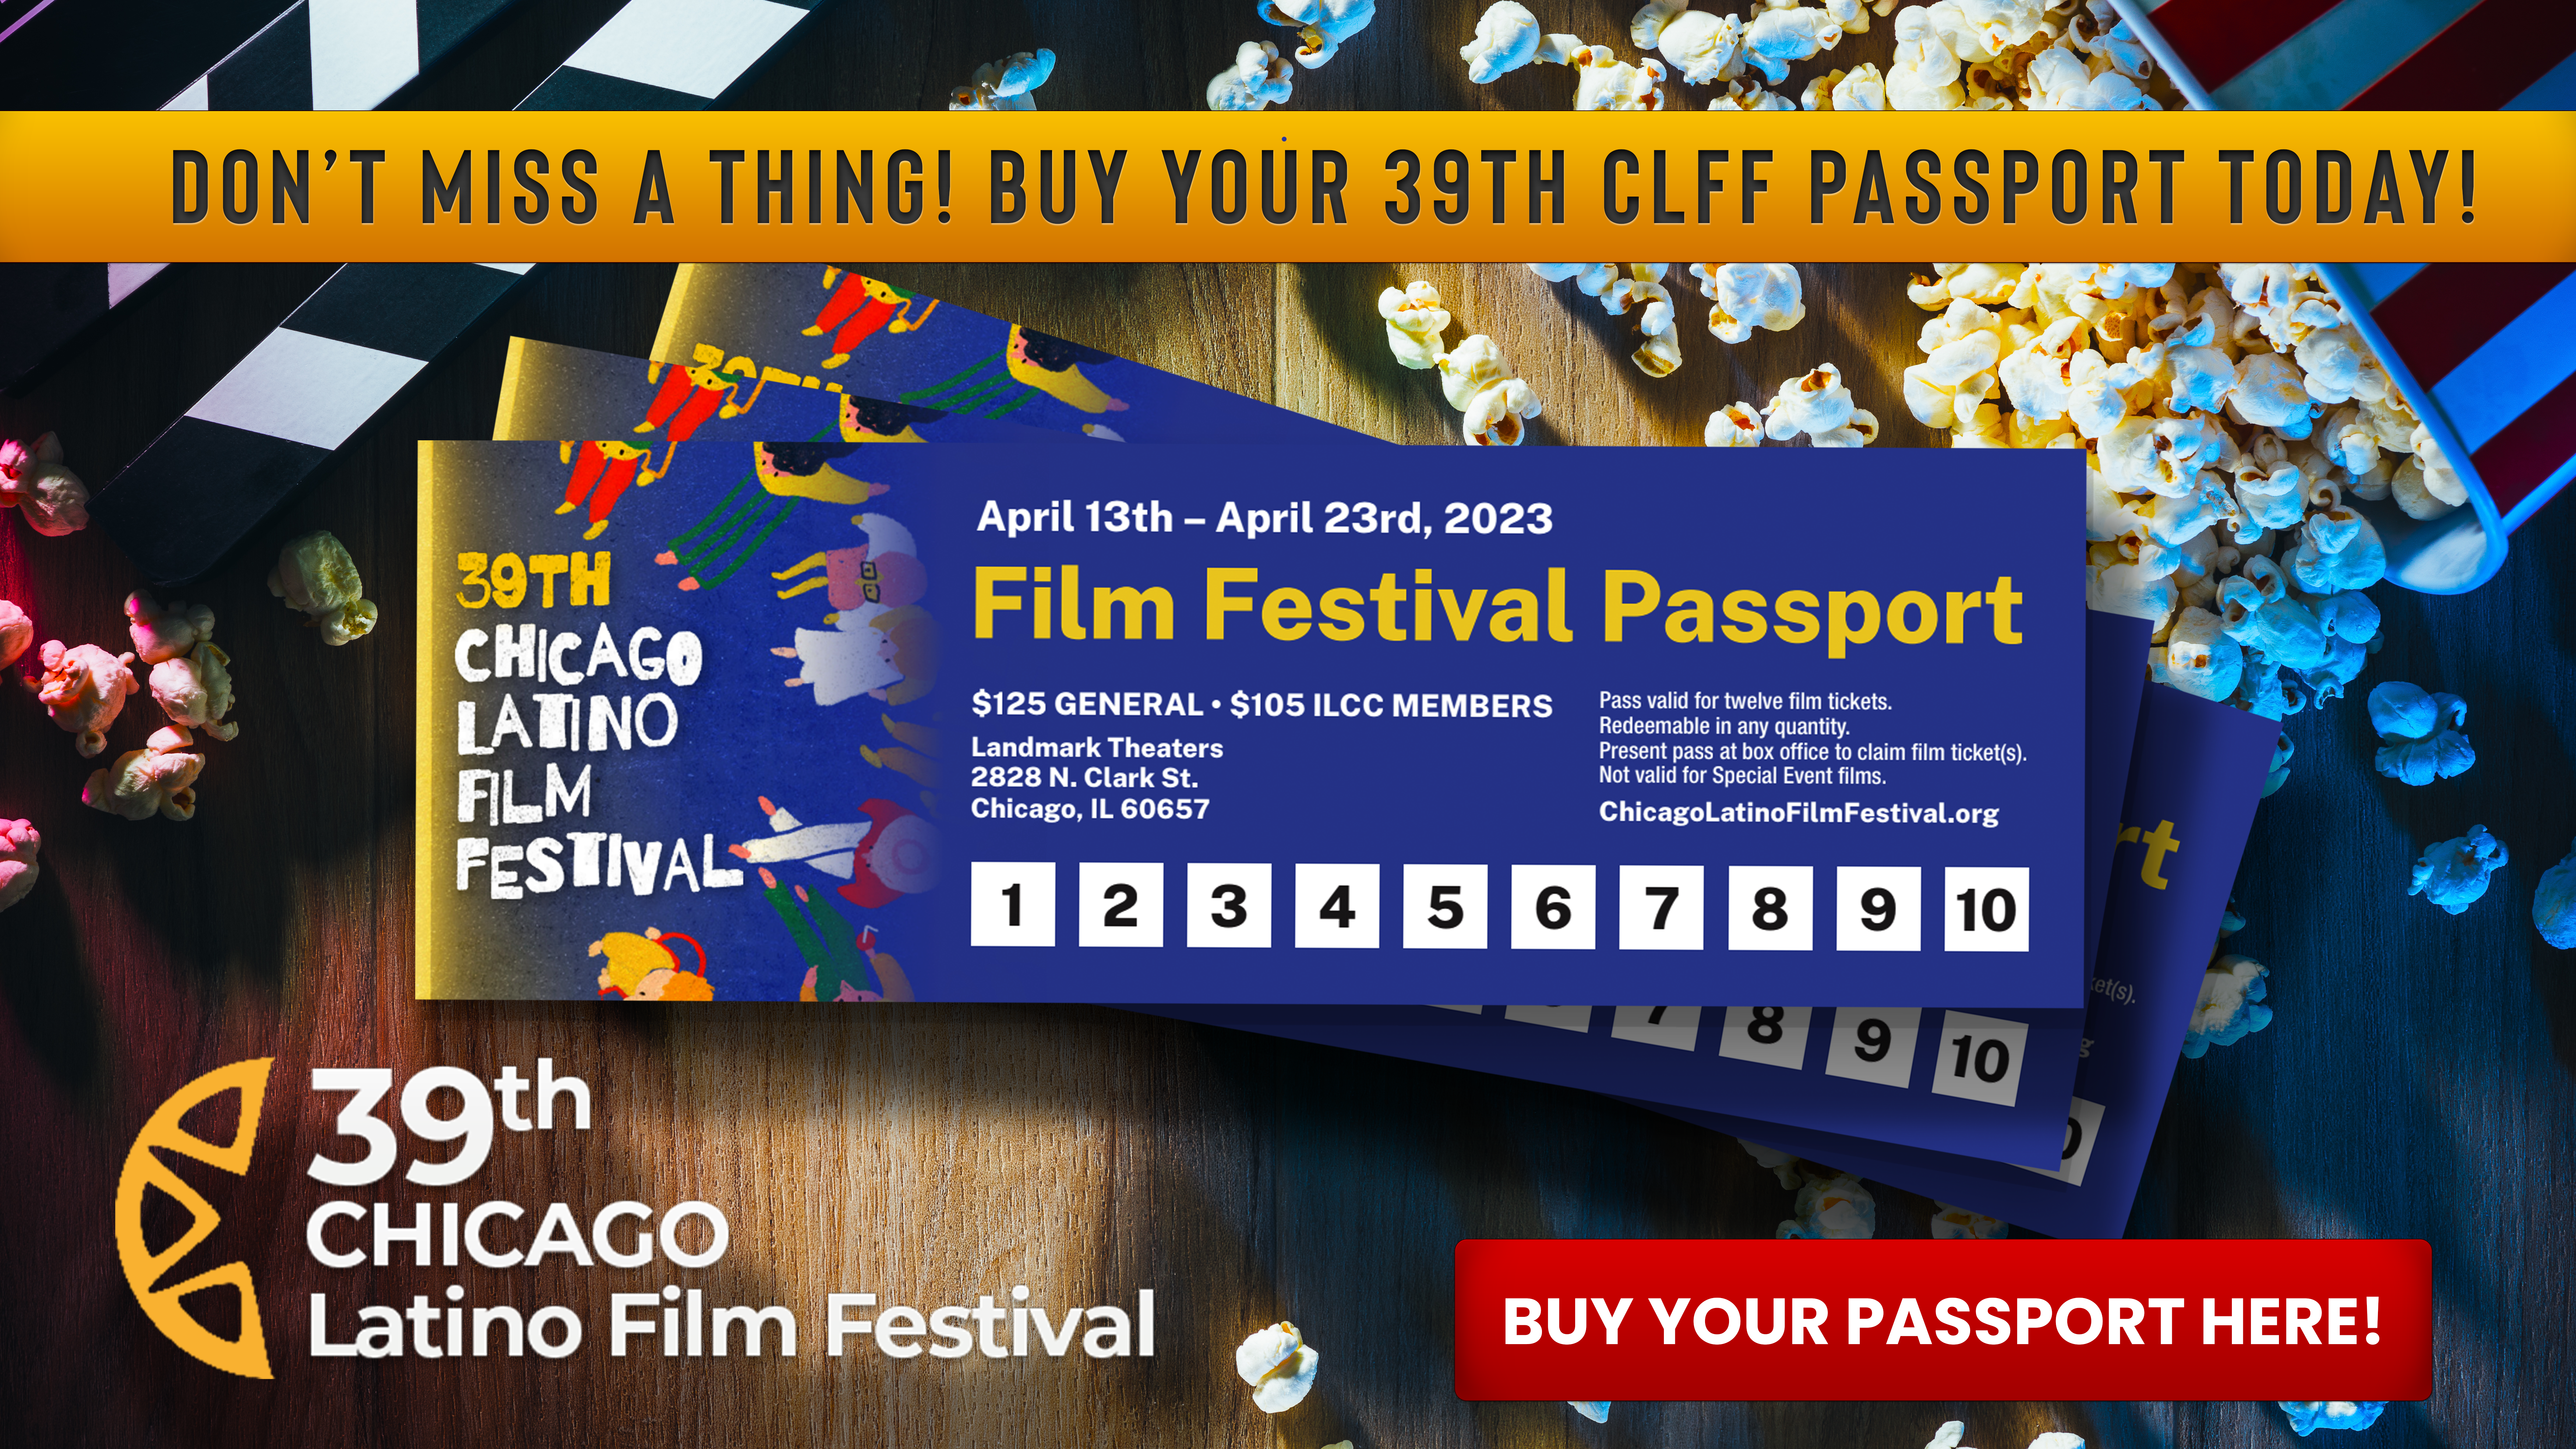 Buy the 10 Film Passport for the 39th Chicago Latino Film Festival. On Sale at the ChicagoLatinoFilmFestival.org